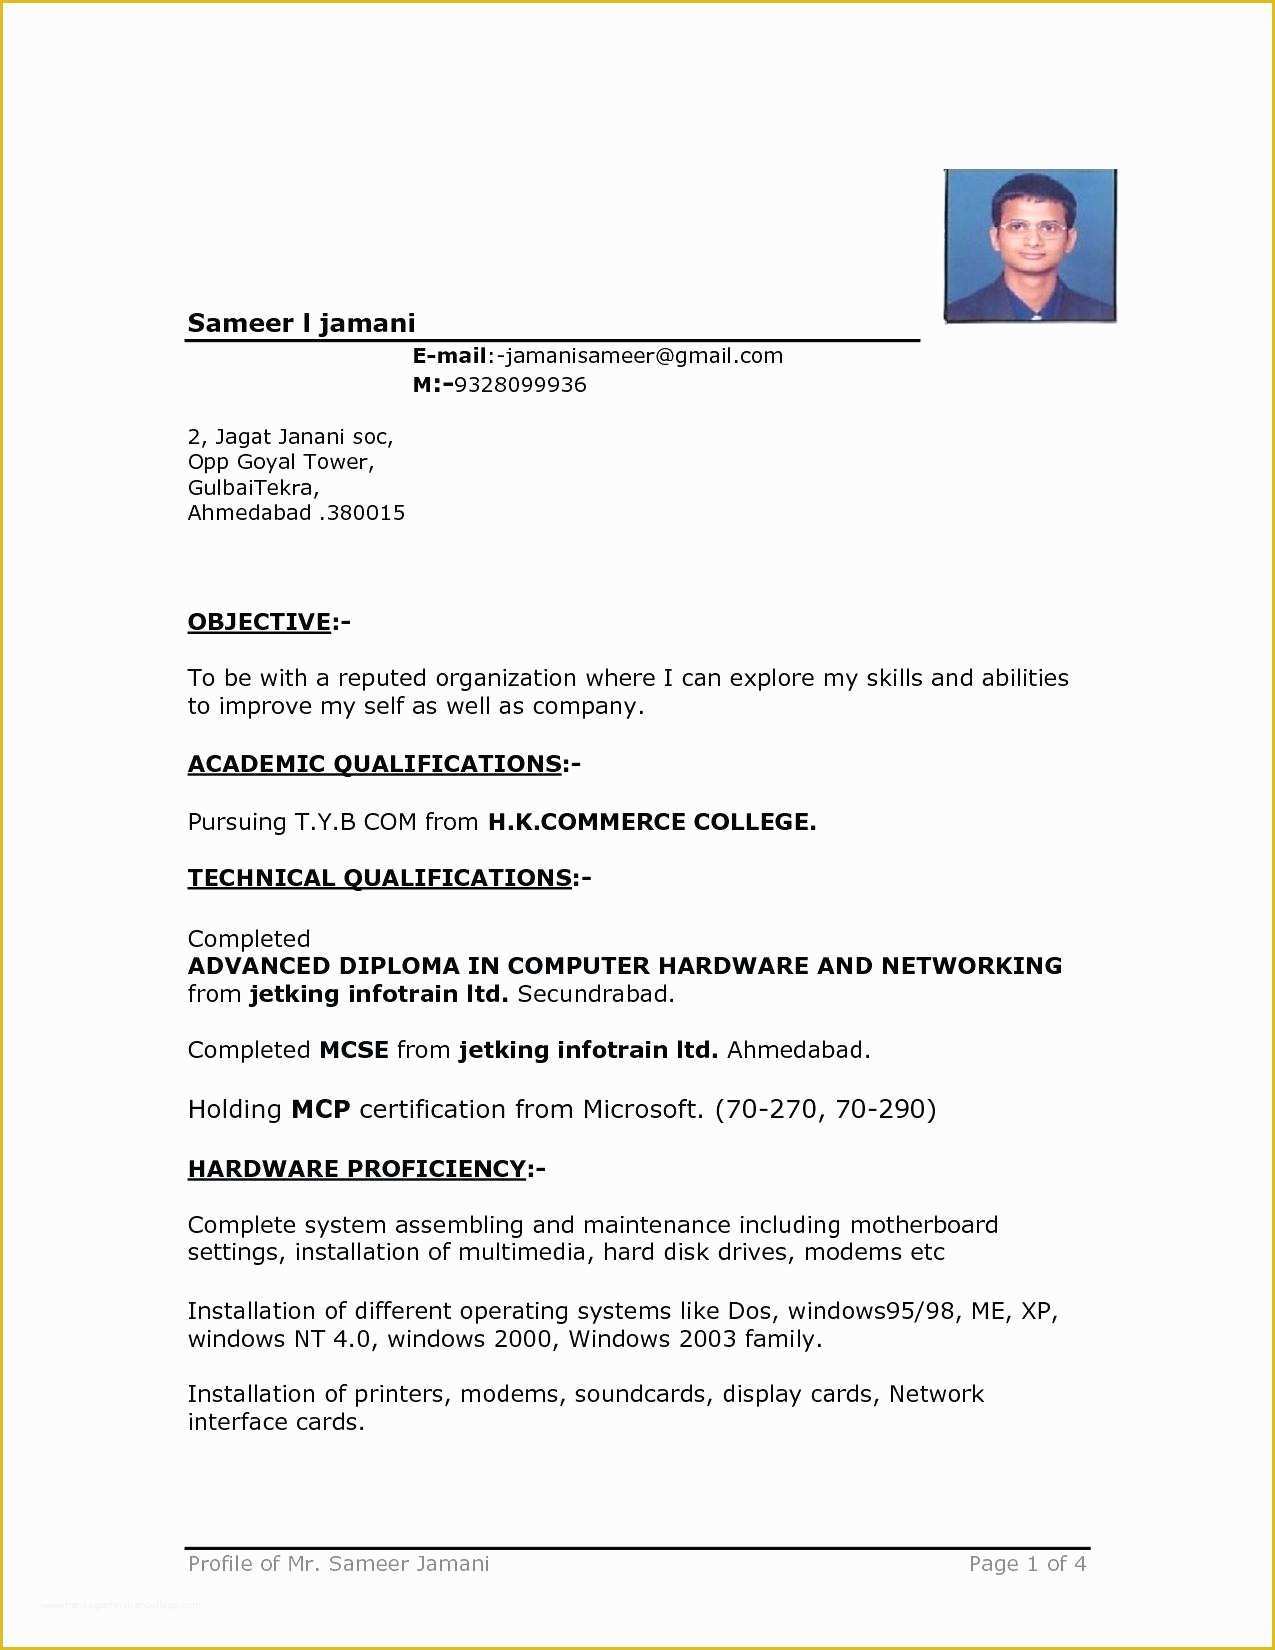 Free Windows Resume Templates Of Free Sample Resume In Word format for Windows 10 1 Tag 50